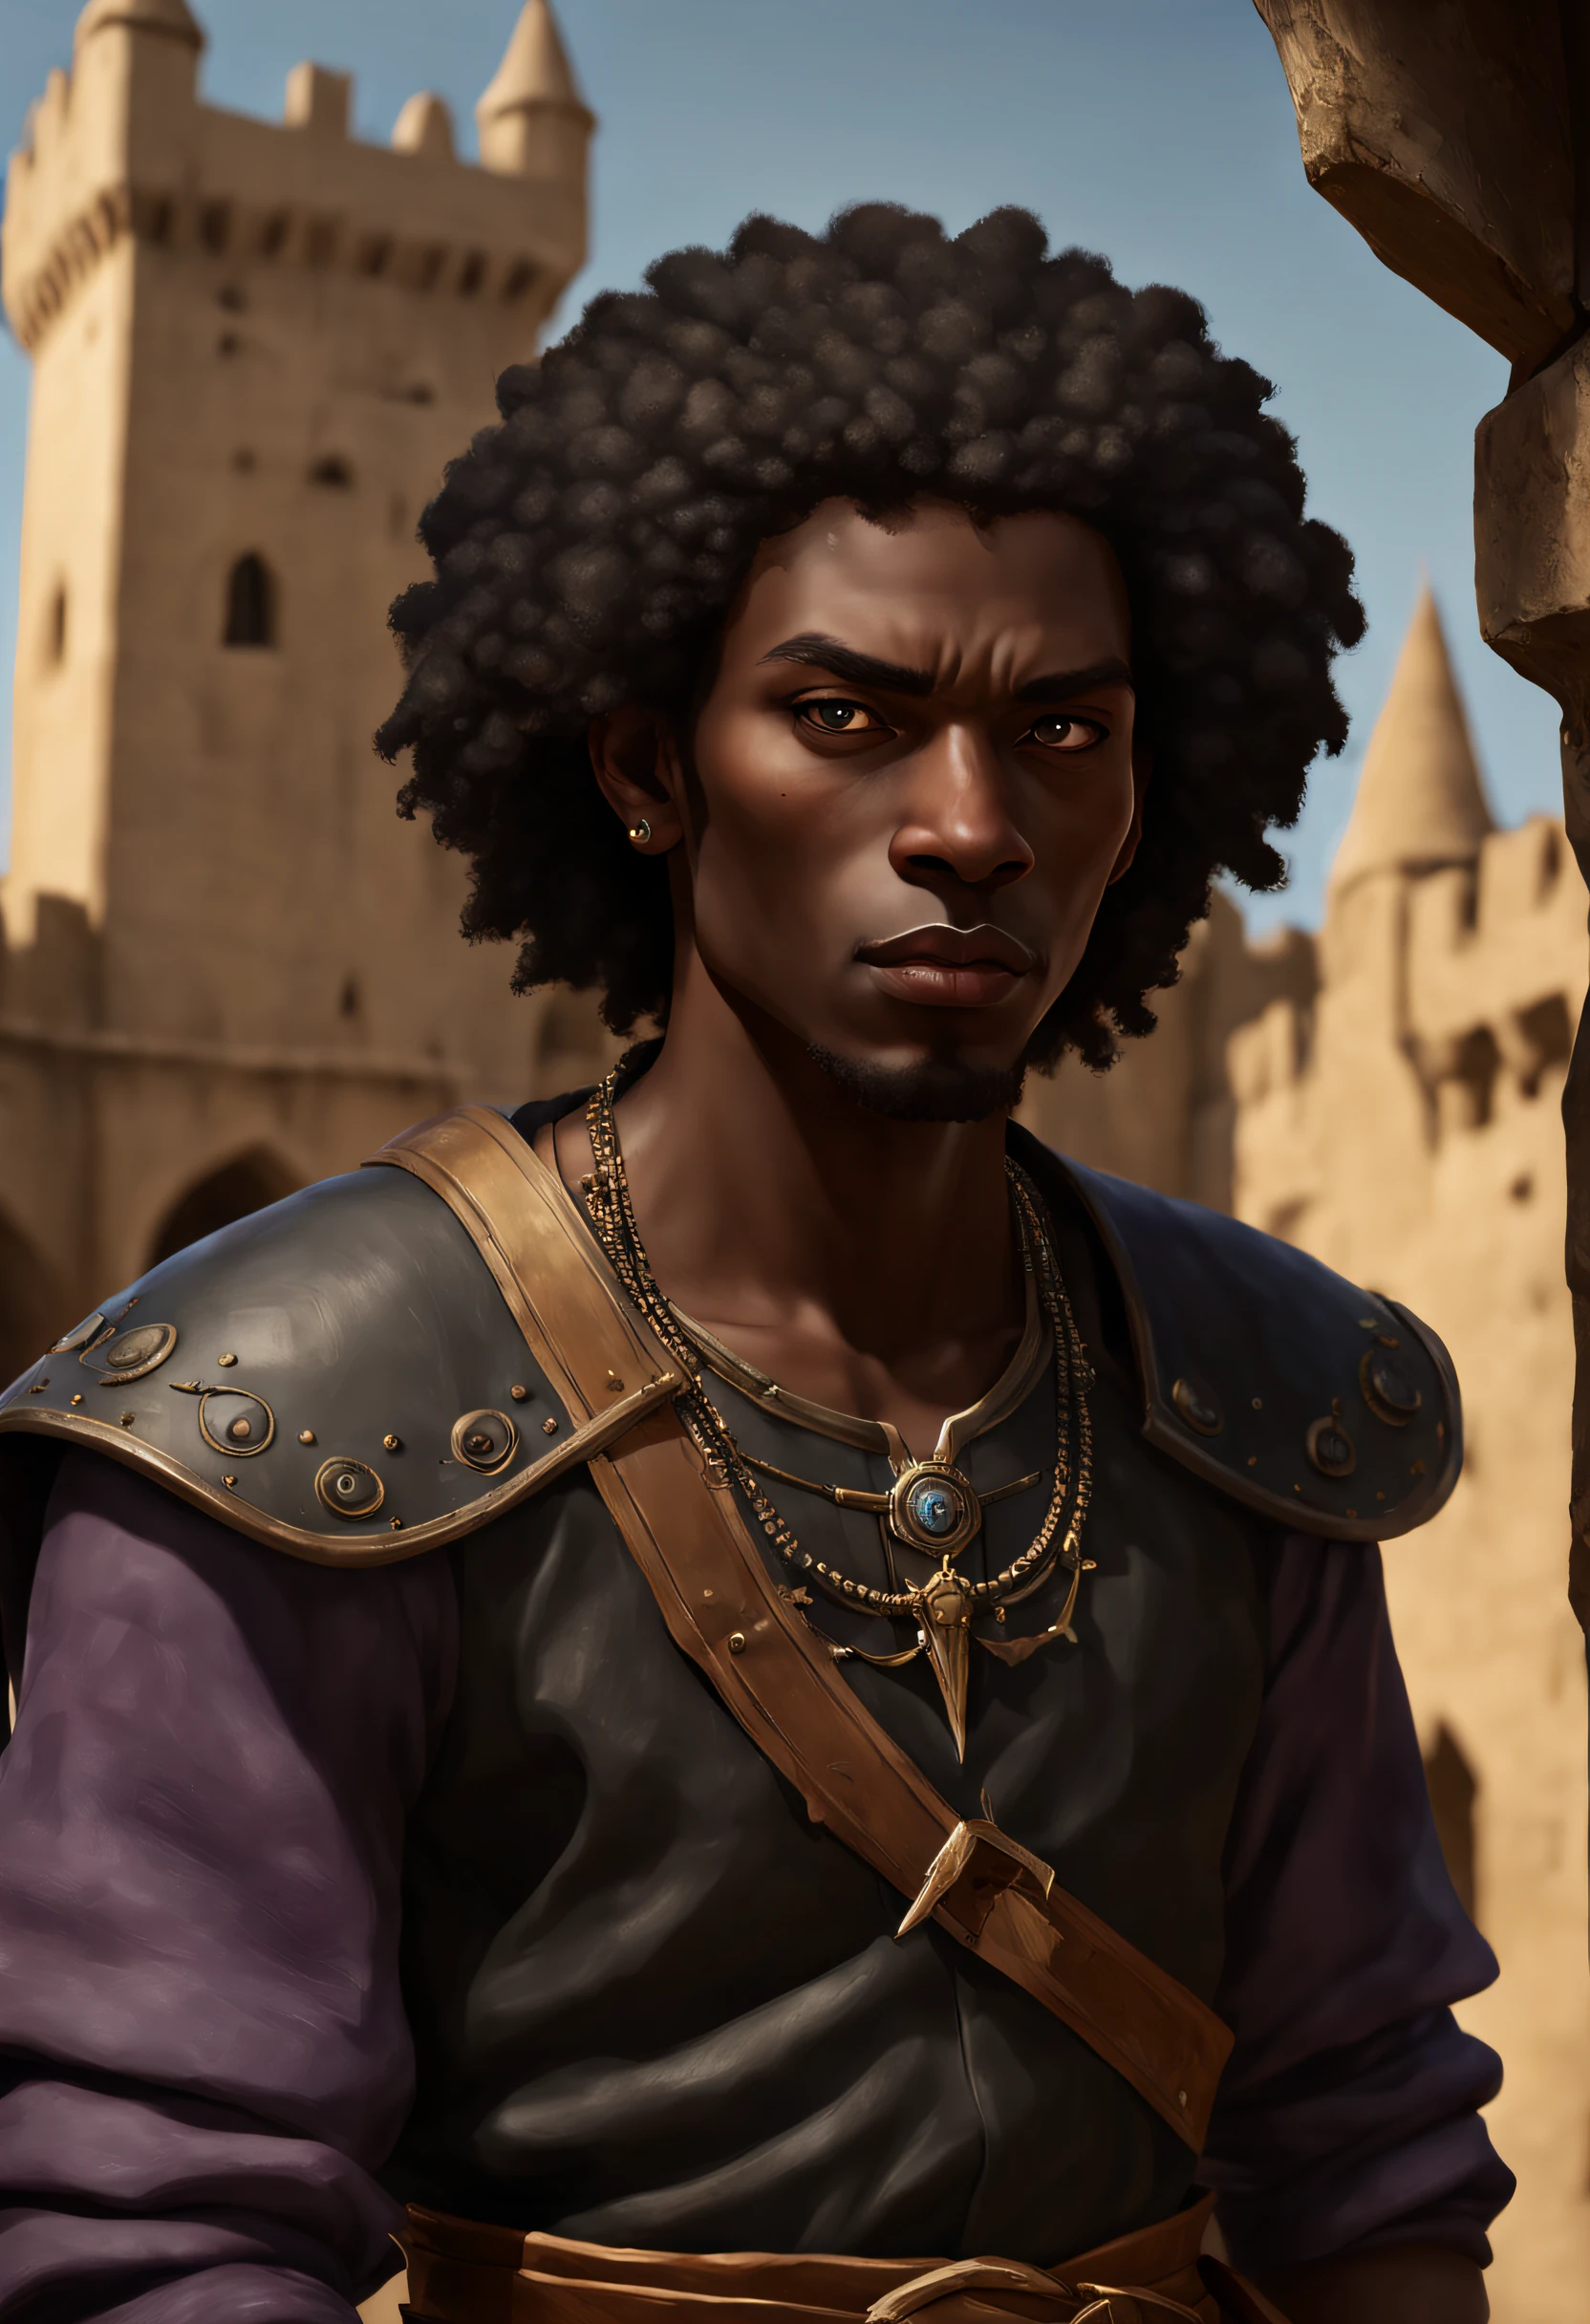 (((bald african man))), (((black african man))), (((young african man))), ((best qualityer)), ((medieval fantasy)), (extremely young and attractive), (yellowish thin clothes), (light outfits), light cinematic, ((weaponless)), ((medieval conjurer man)), ((purple eyes)), ((yellowed leather clothes)), ((conceptual artwork)), ((fully body)), (The setting is a vampire castle in the desert), (confident expression), (character focus), (RPG medieval), (dungeons and dragons), (Wizard Character), (Psionic character), (powers of the mind), (Medieval Conjurer), (medieval fiction)